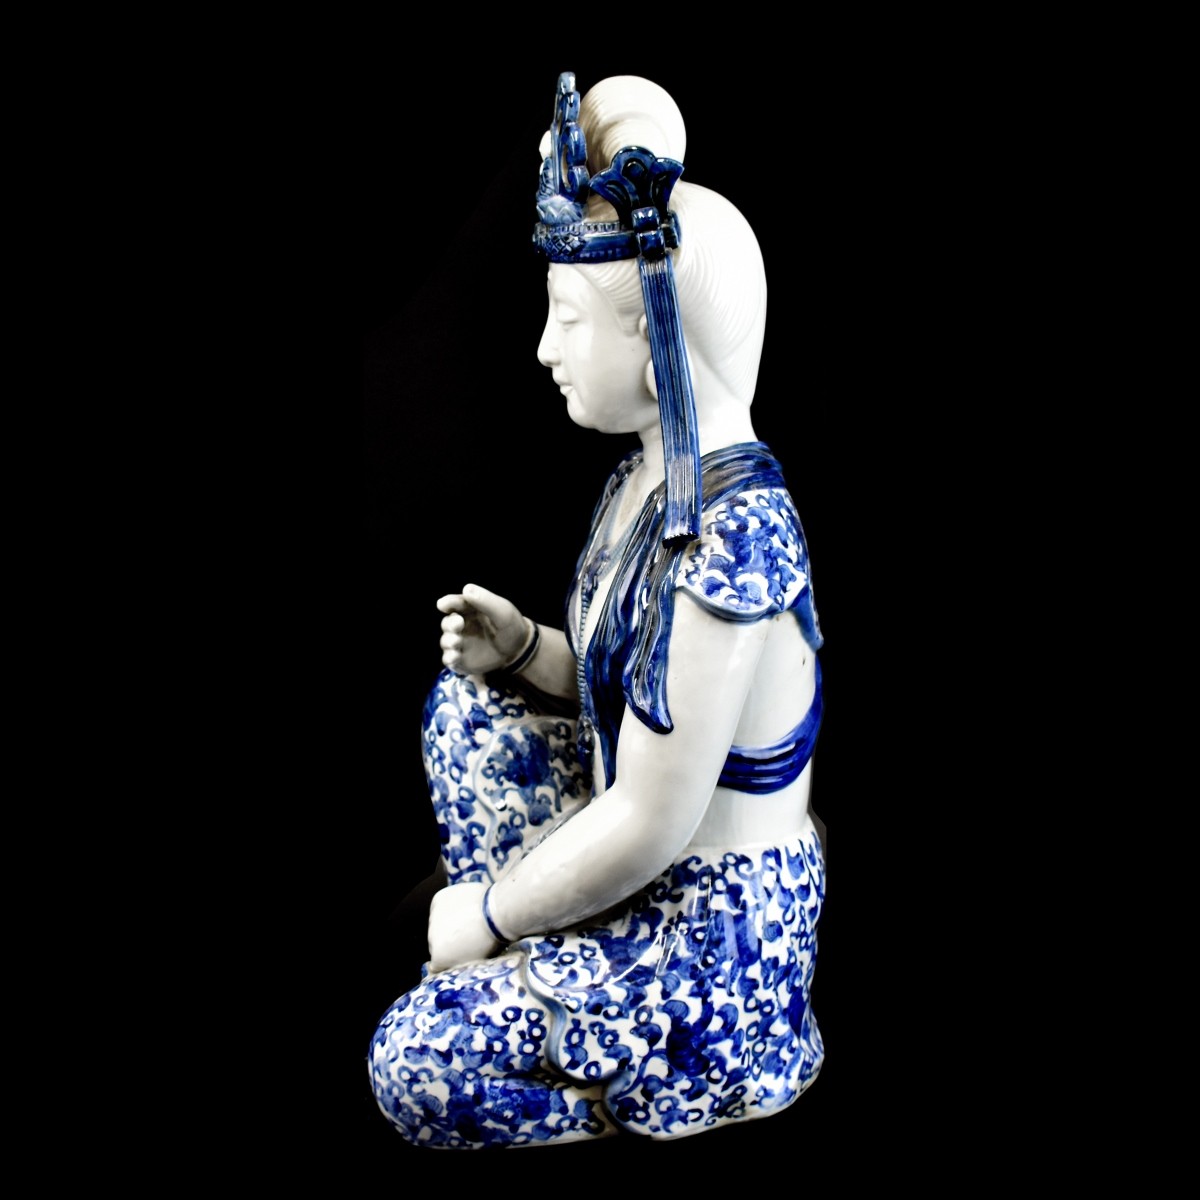 Large 20th C. Chinese Porcelain Figurine